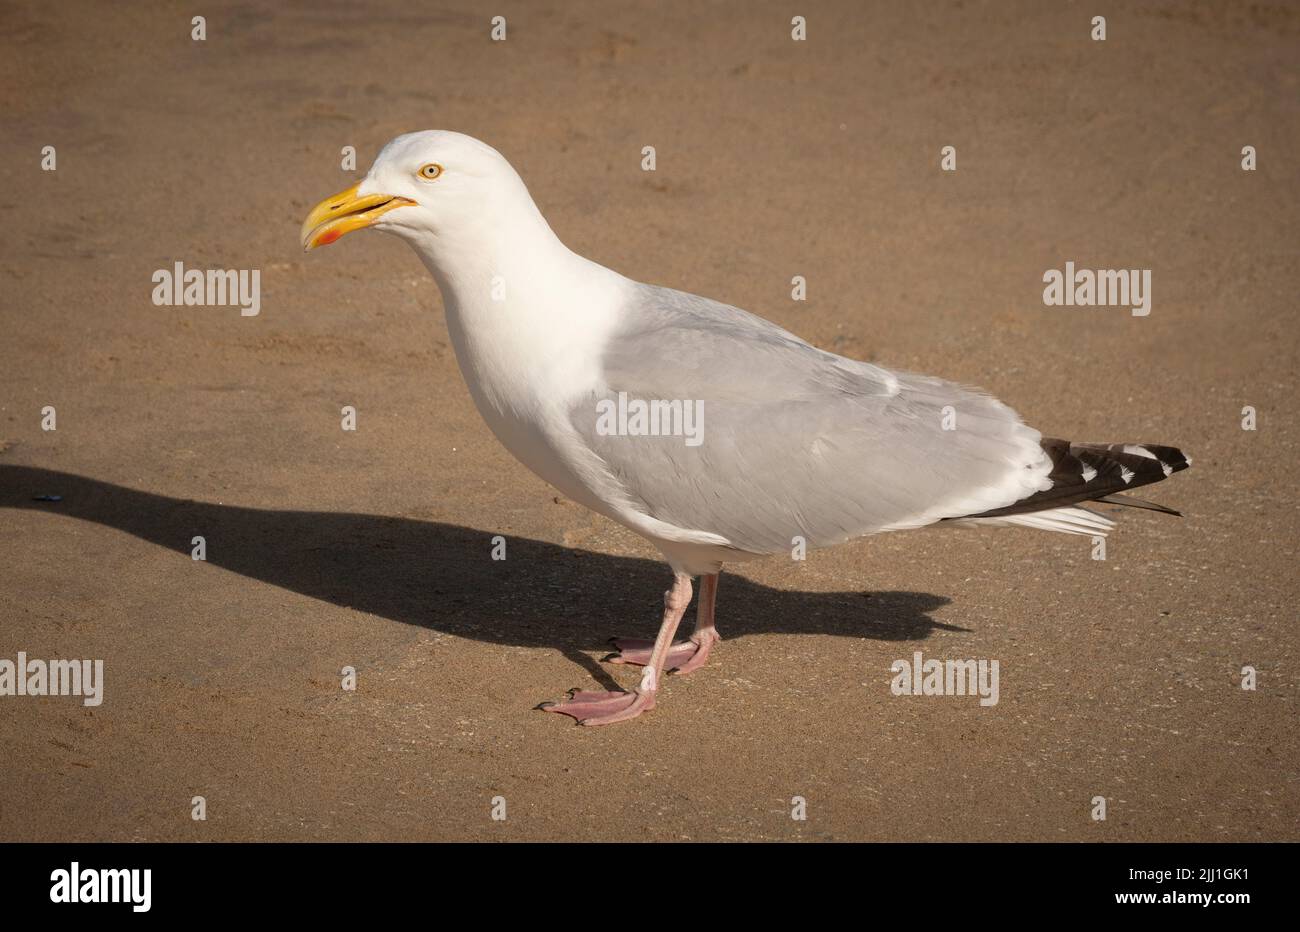 Seagull on the beach at Scarborough, UK. Stock Photo